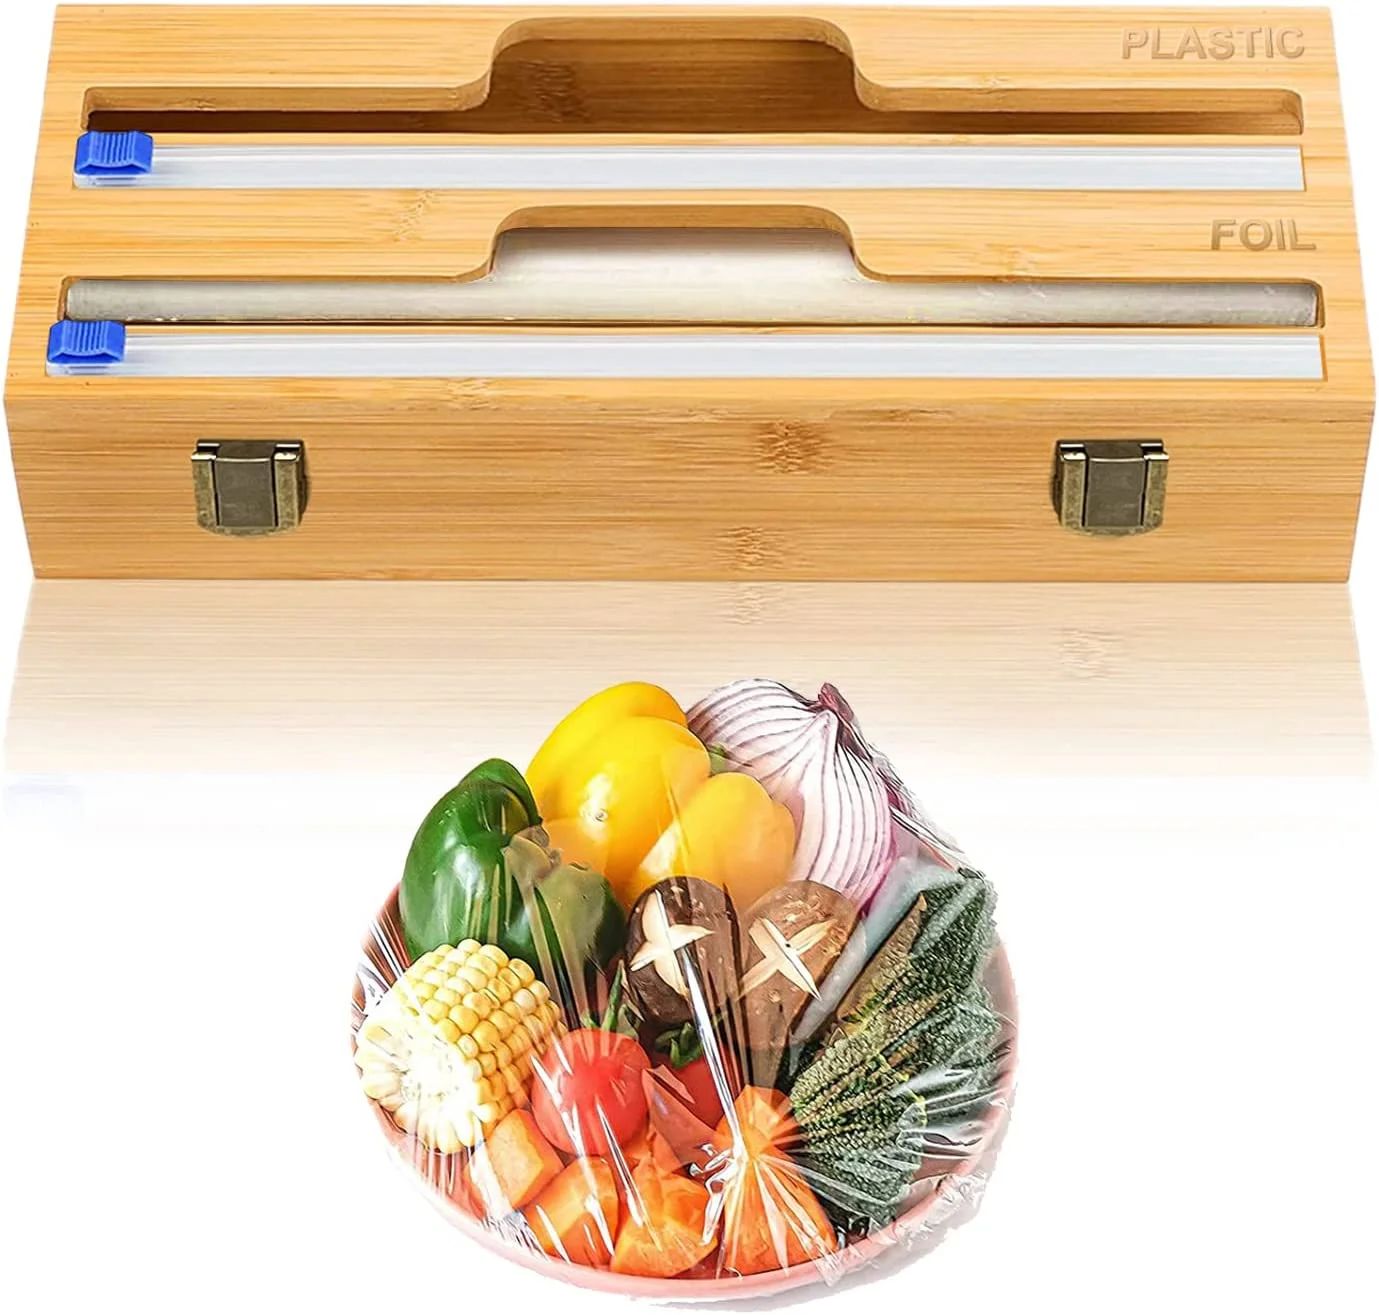 Teepeu Bamboo Foil and Plastic Wrap Dispenser with Cutter for Kitchen Organization Storage Bags | Walmart (US)